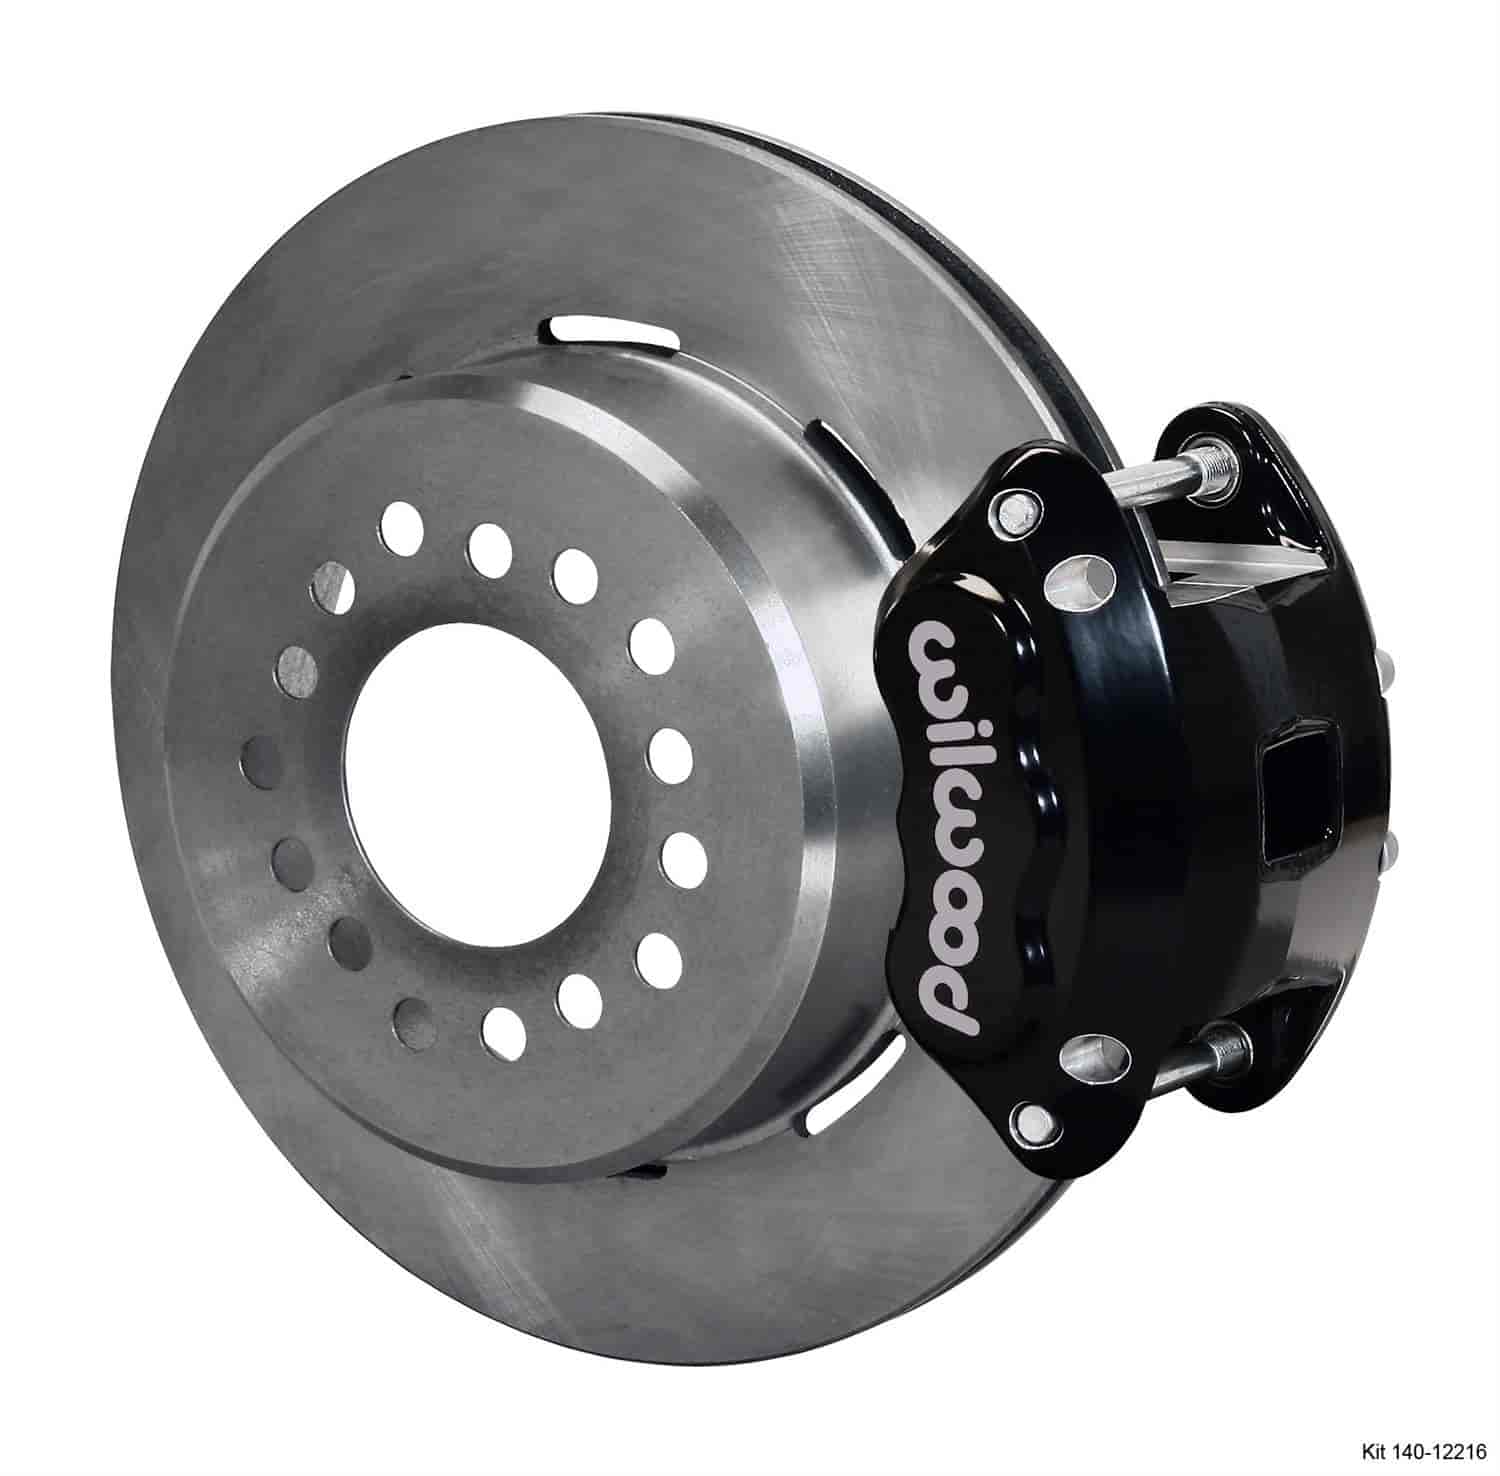 D154 Rear Parking Brake Kit Rear End: Big Ford New Style(2.36" Axle Offset)